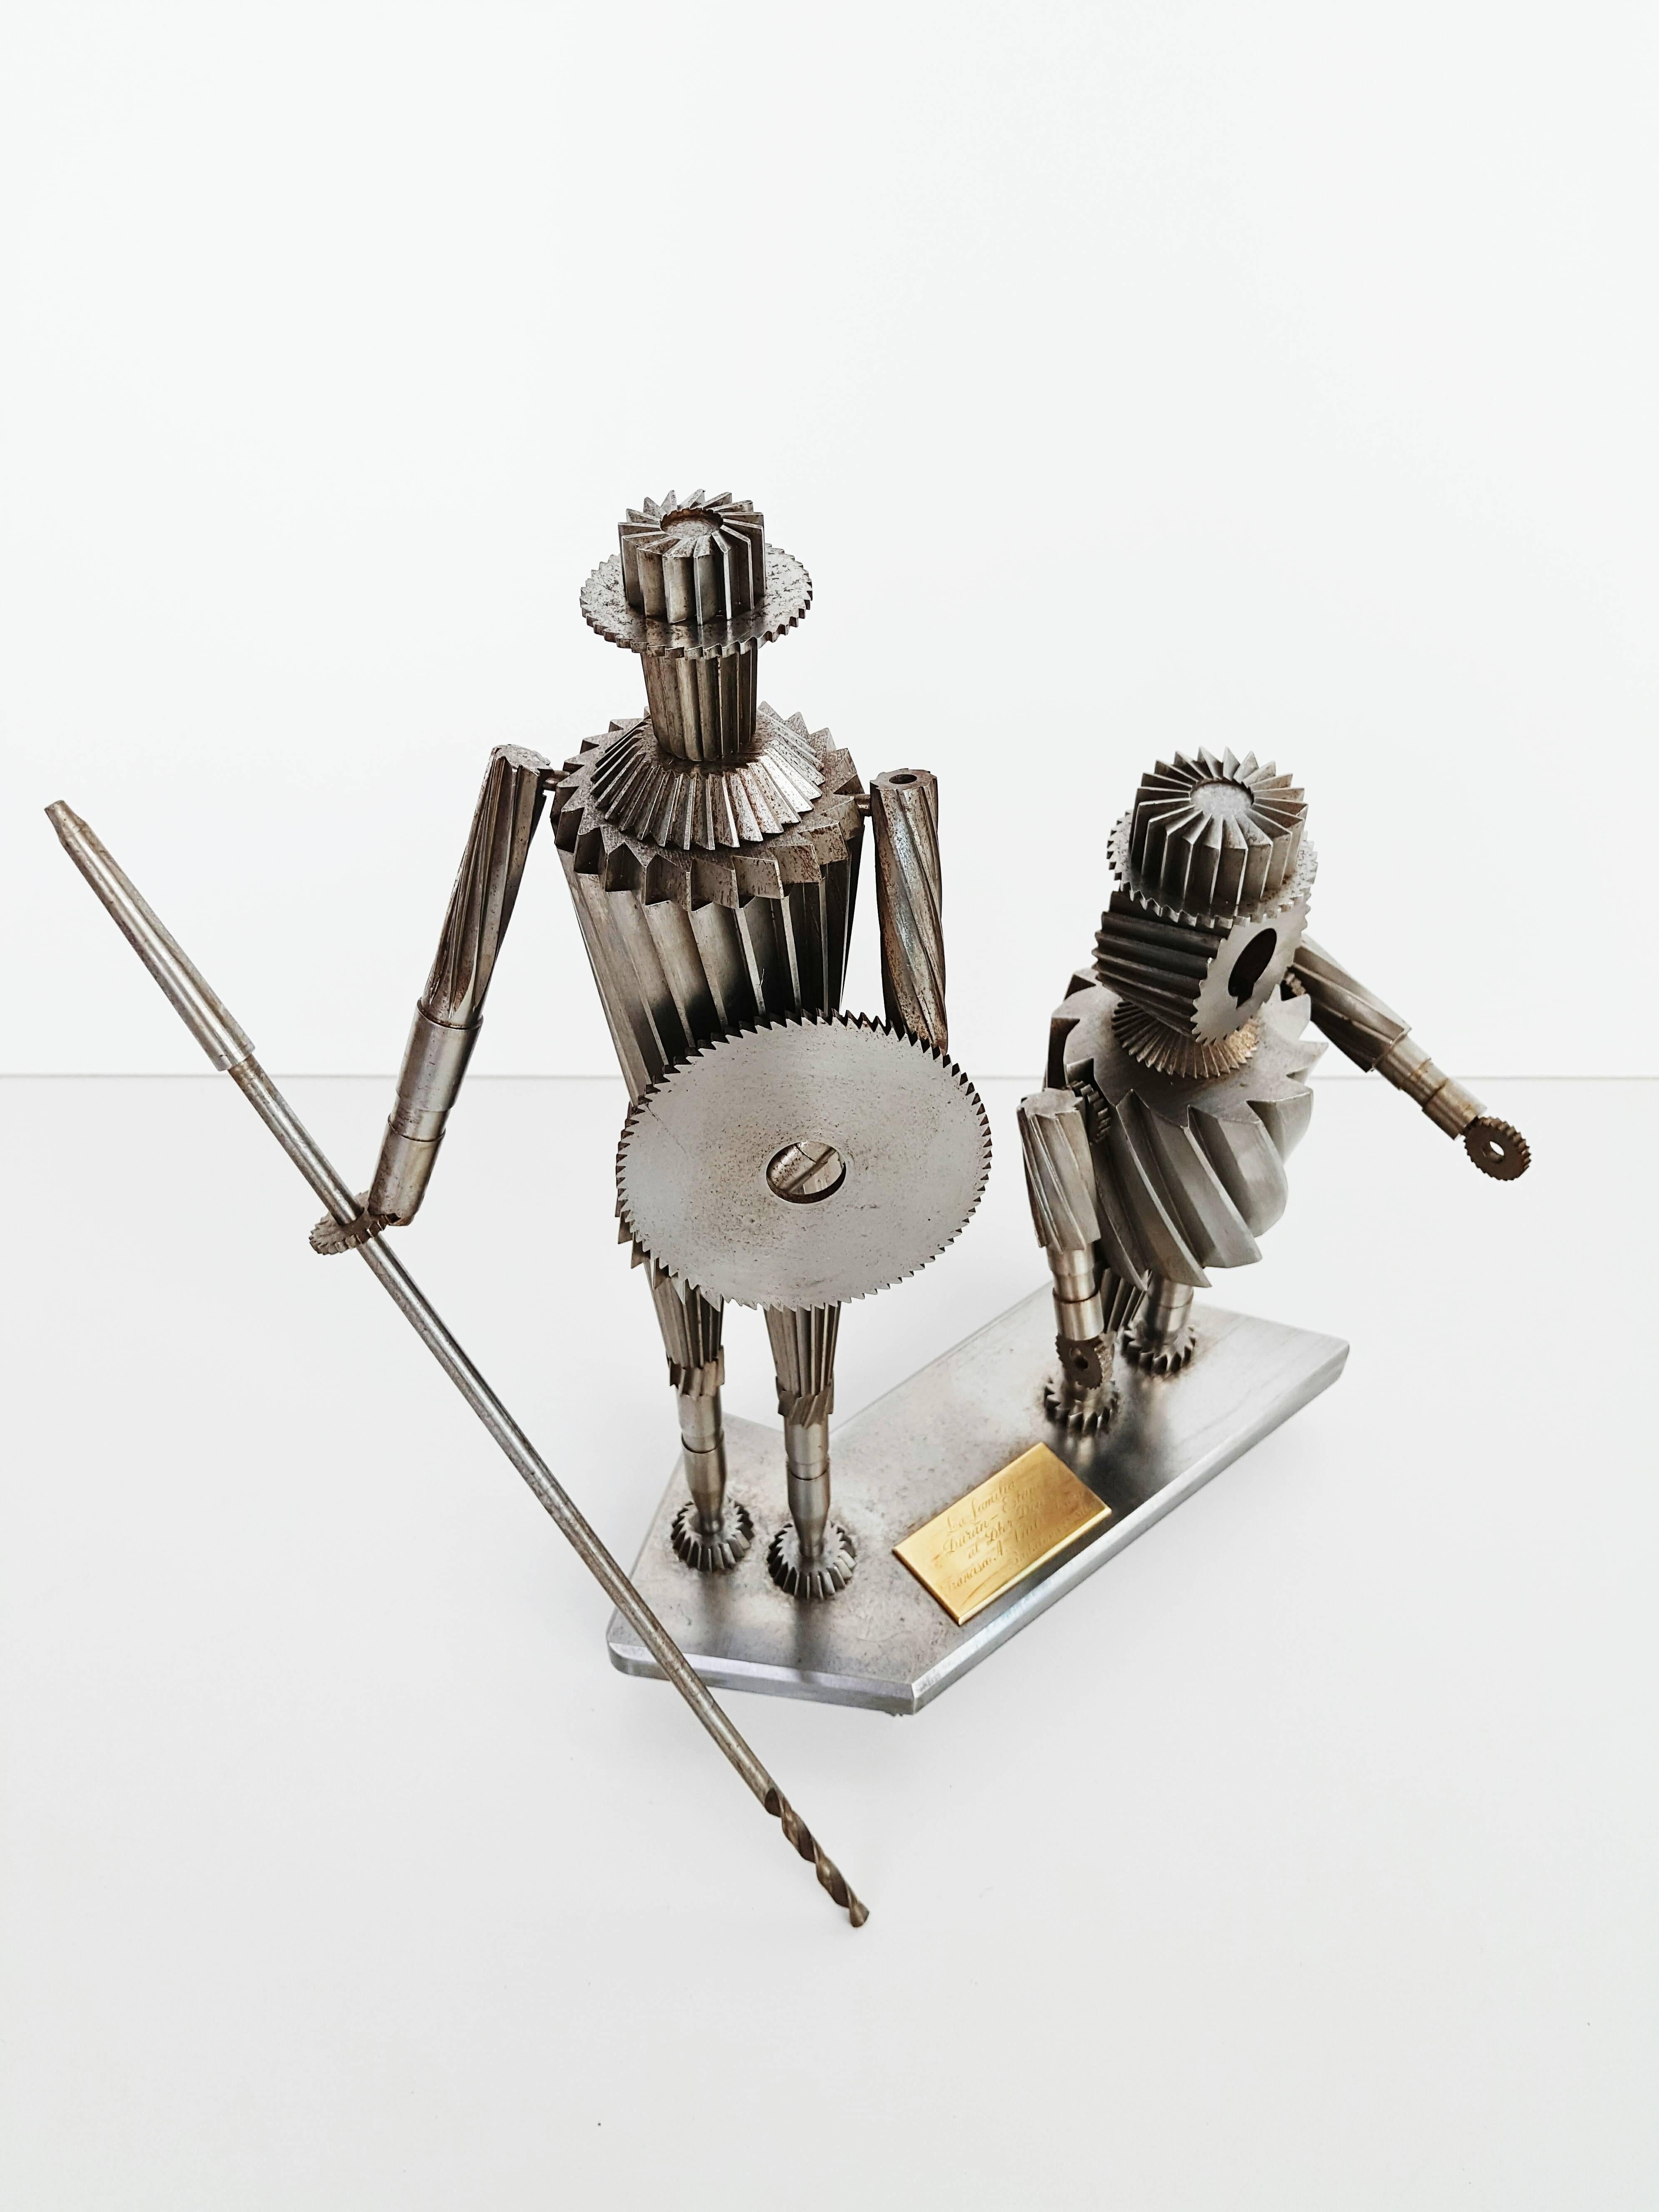 Incredible metal sculpture representing Don Quixote and Sancho Penza,  dated 1967 Spain. 
The arms are articulated, it is a very precise work made of different gears, the whole being very heavy.
Don Quixote, a Spanish novel by Miguel de Cervantes